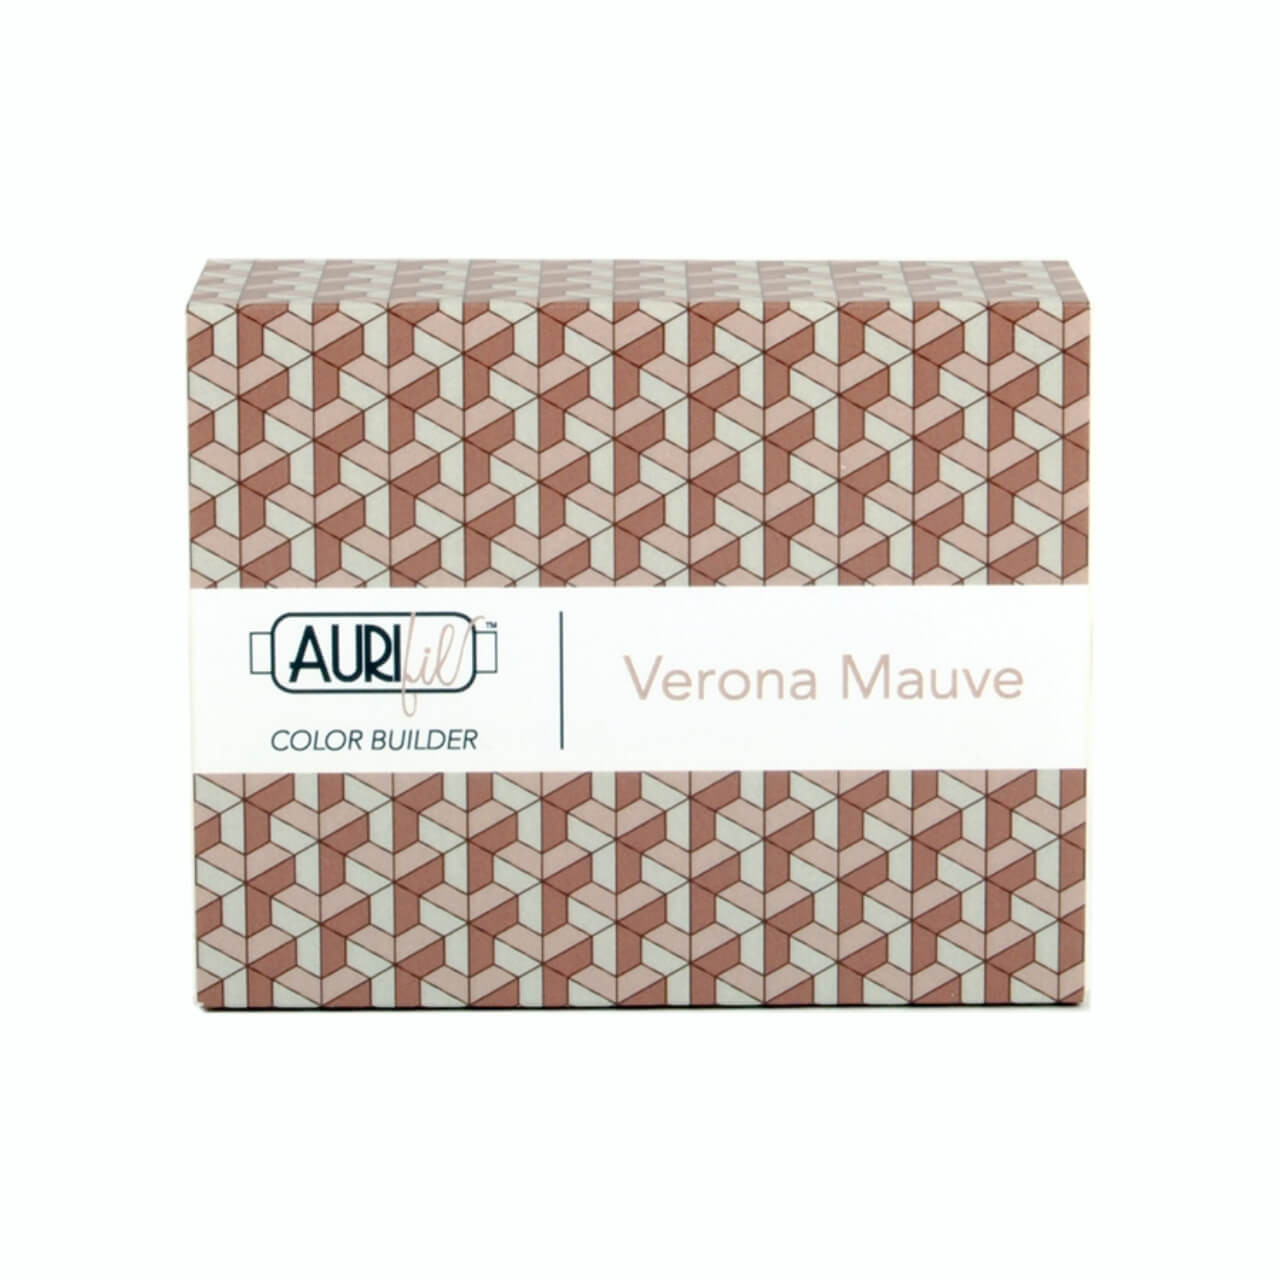 Packaging for Aurifil's Verona Mauve Color Builder, featuring a geometric cube pattern in shades of mauve and beige with the Aurifil logo and "Verona Mauve" text on the label.